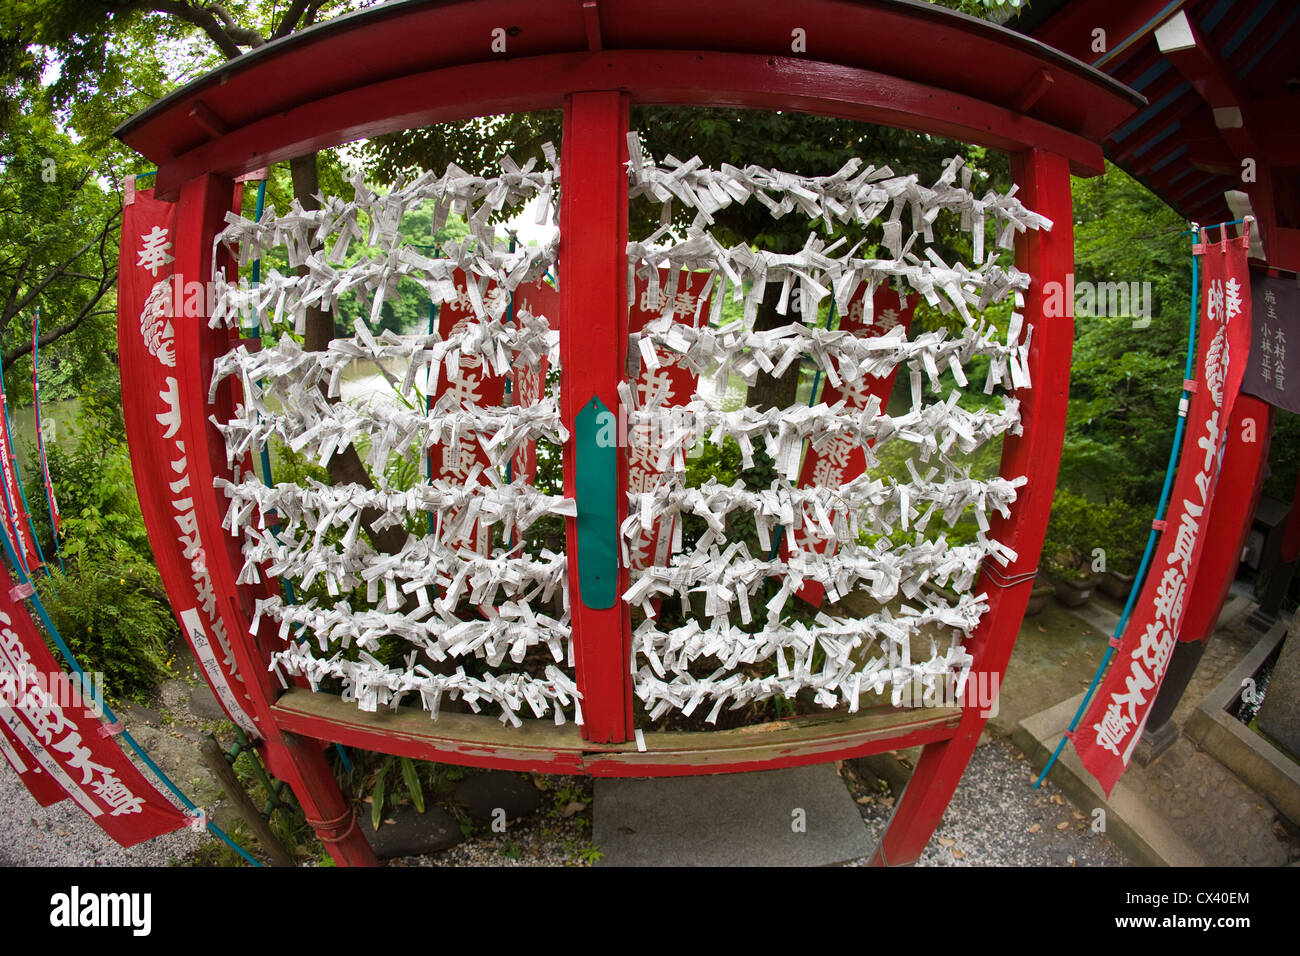 Paper prayers tied to strings at a Buddhist temple in Tokyo, Japan. Stock Photo